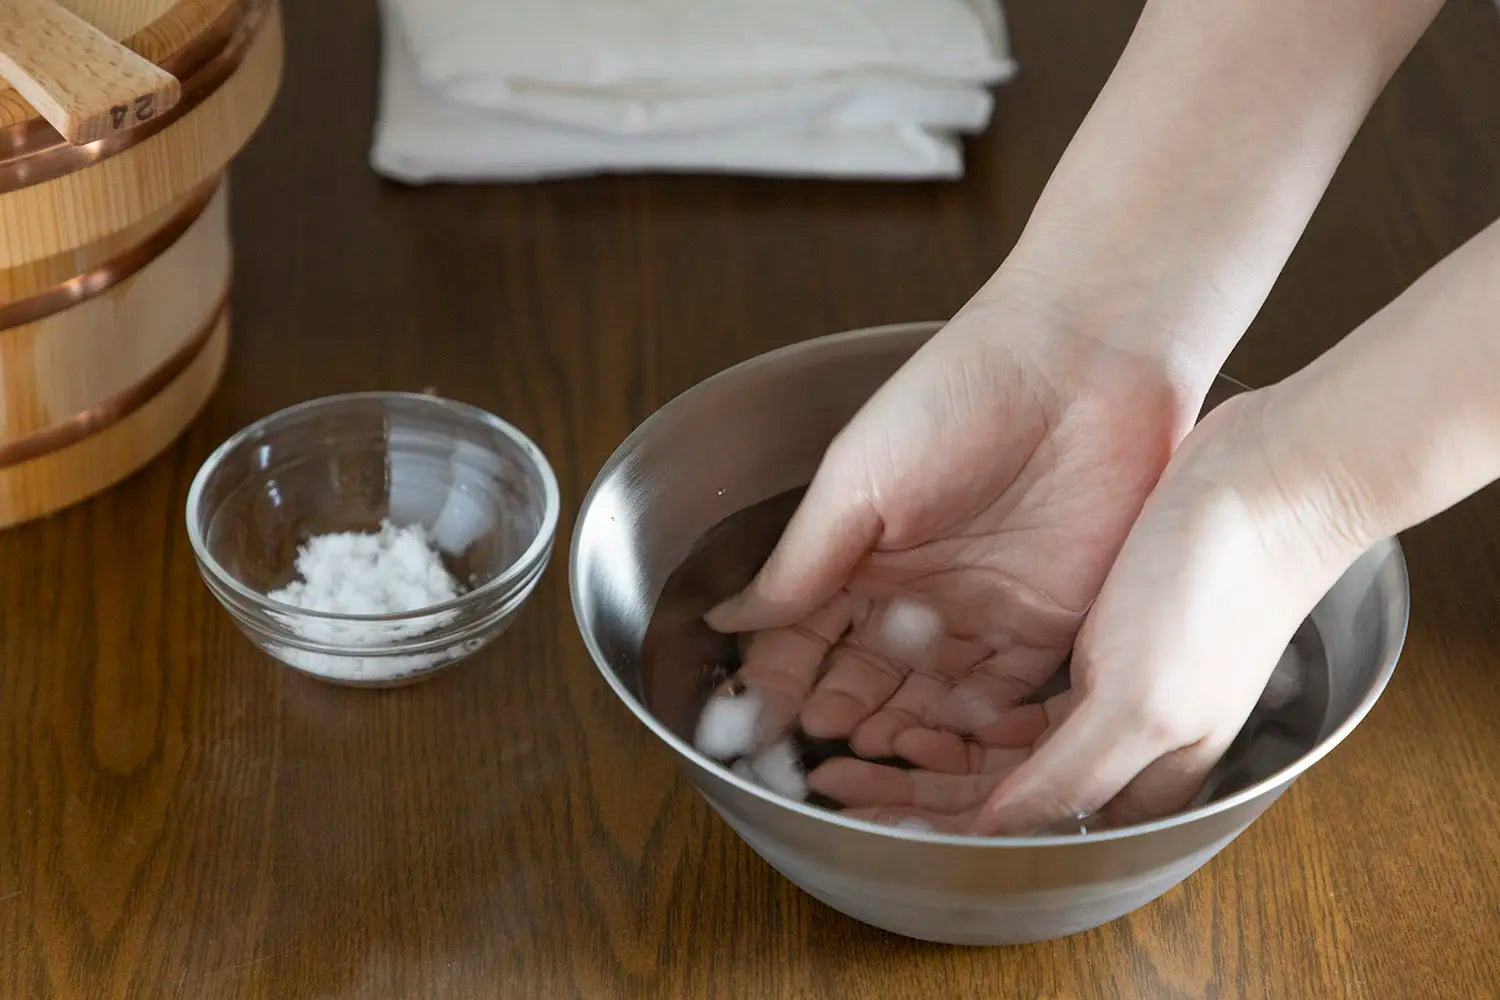 Cooling hands in ice water